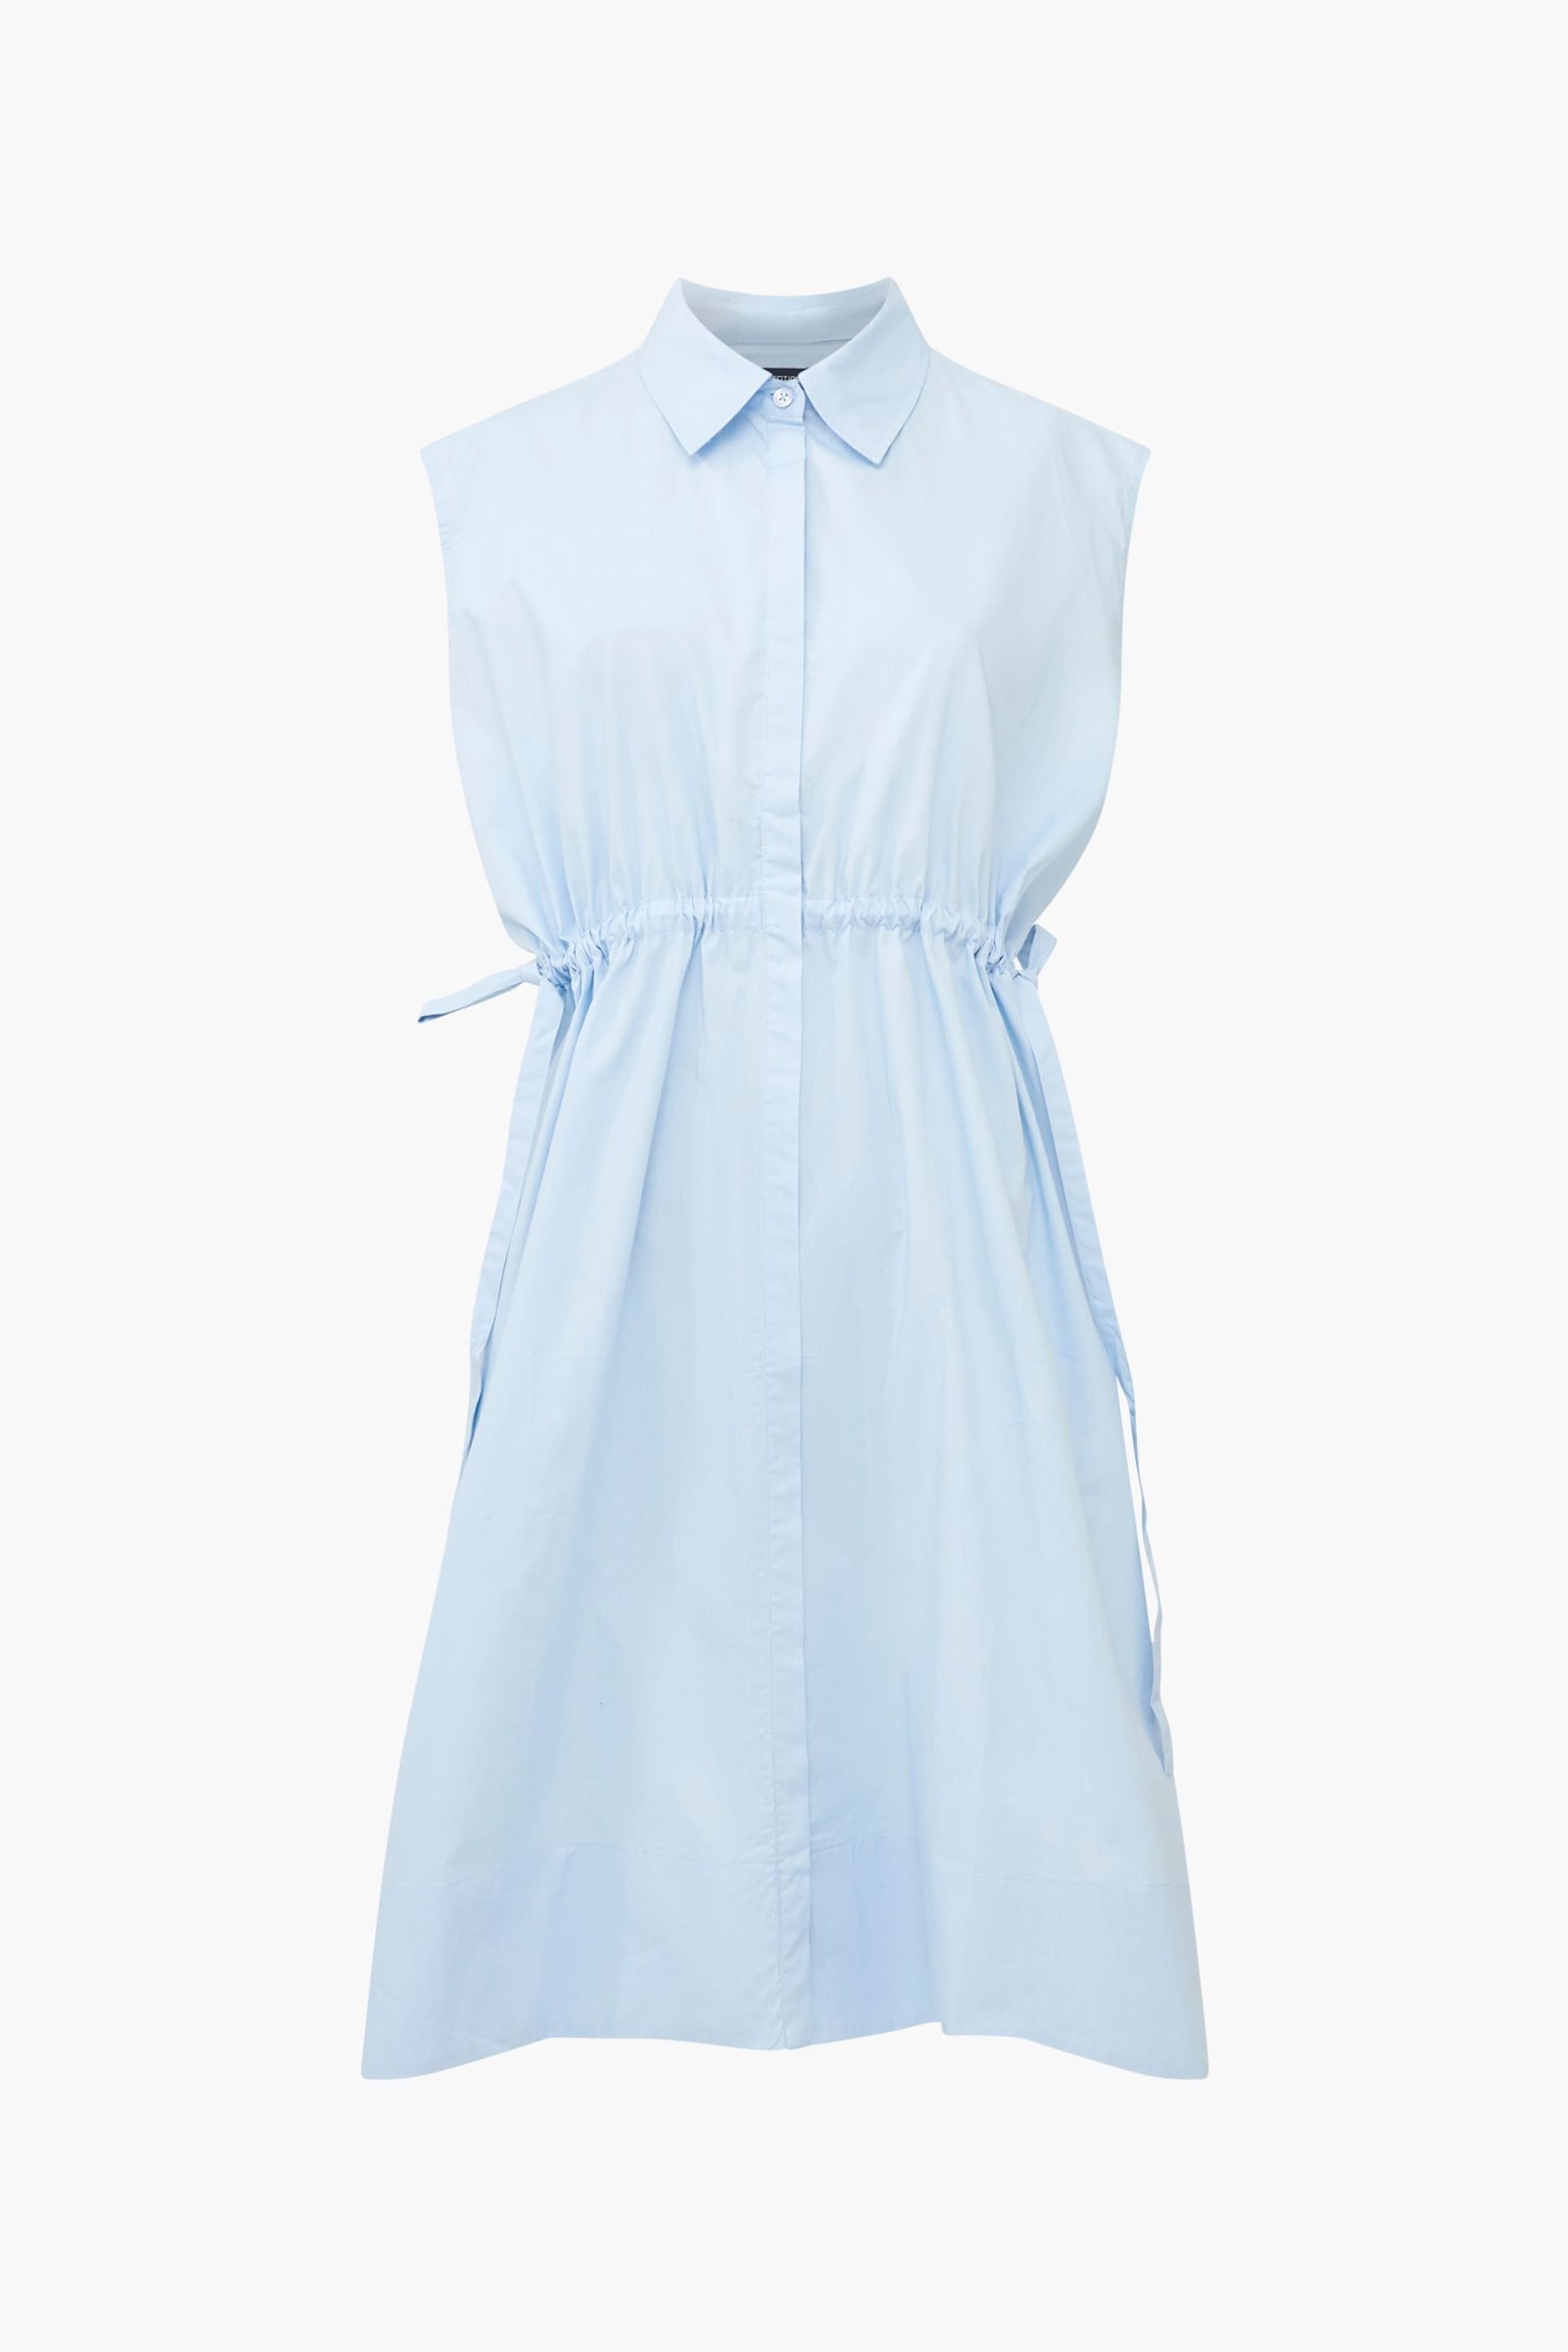 French Connection Blue Rhodes Poplin Shirt Dress - Image 4 of 4